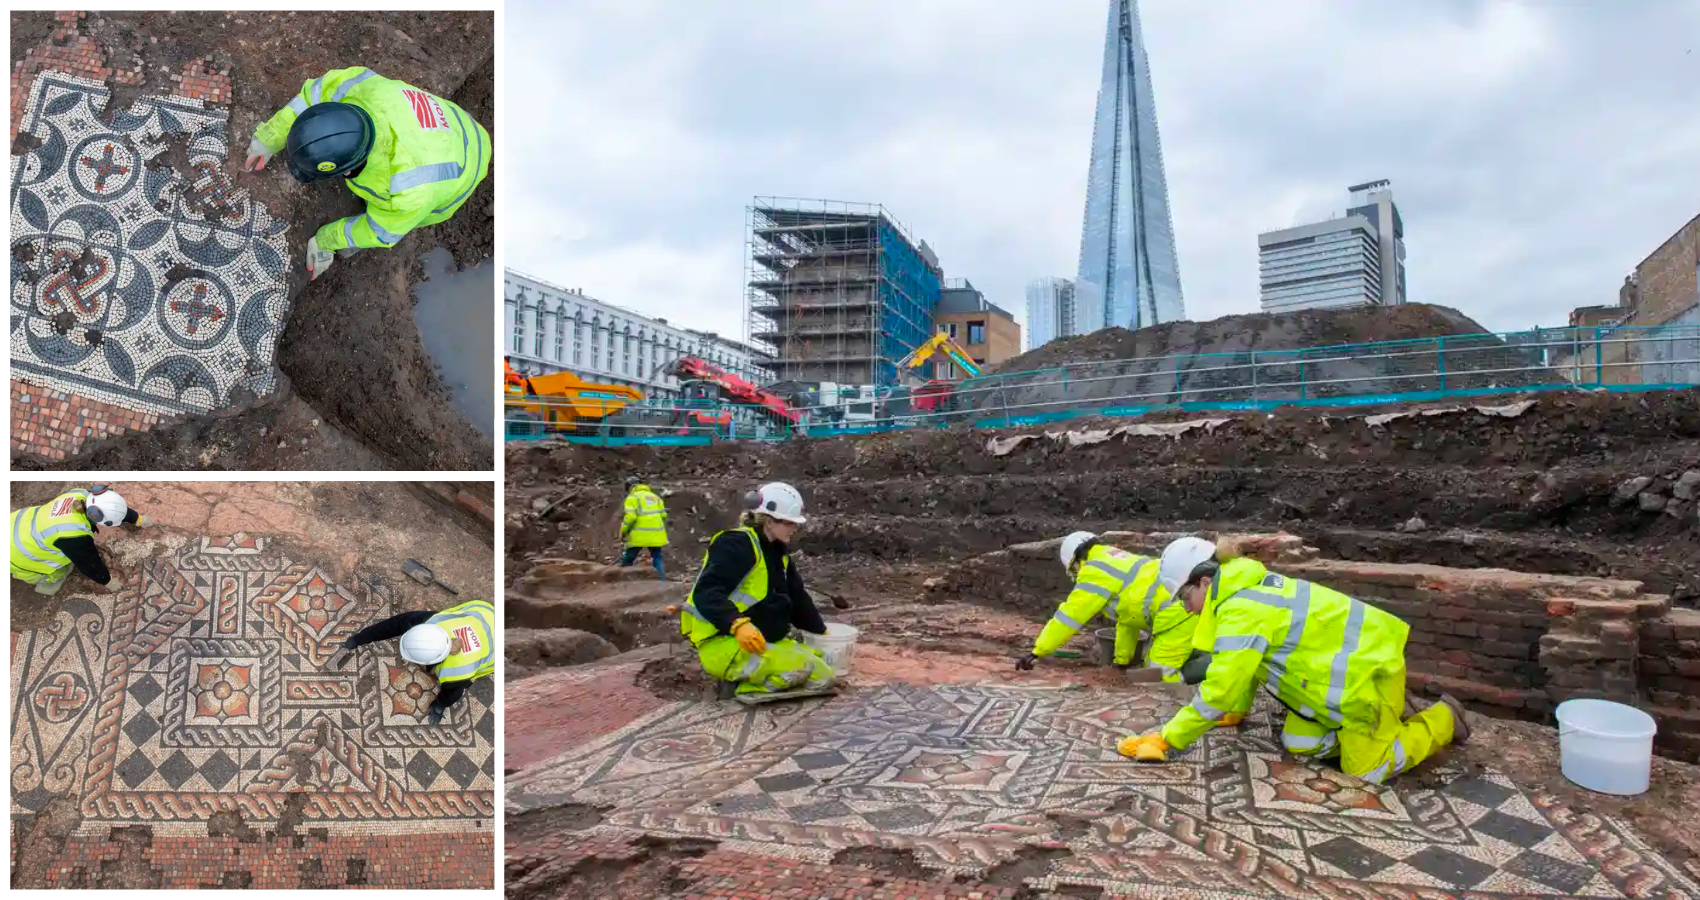 Huge Roman mosaic unearthed in London in ‘once-in-a-lifetime find’